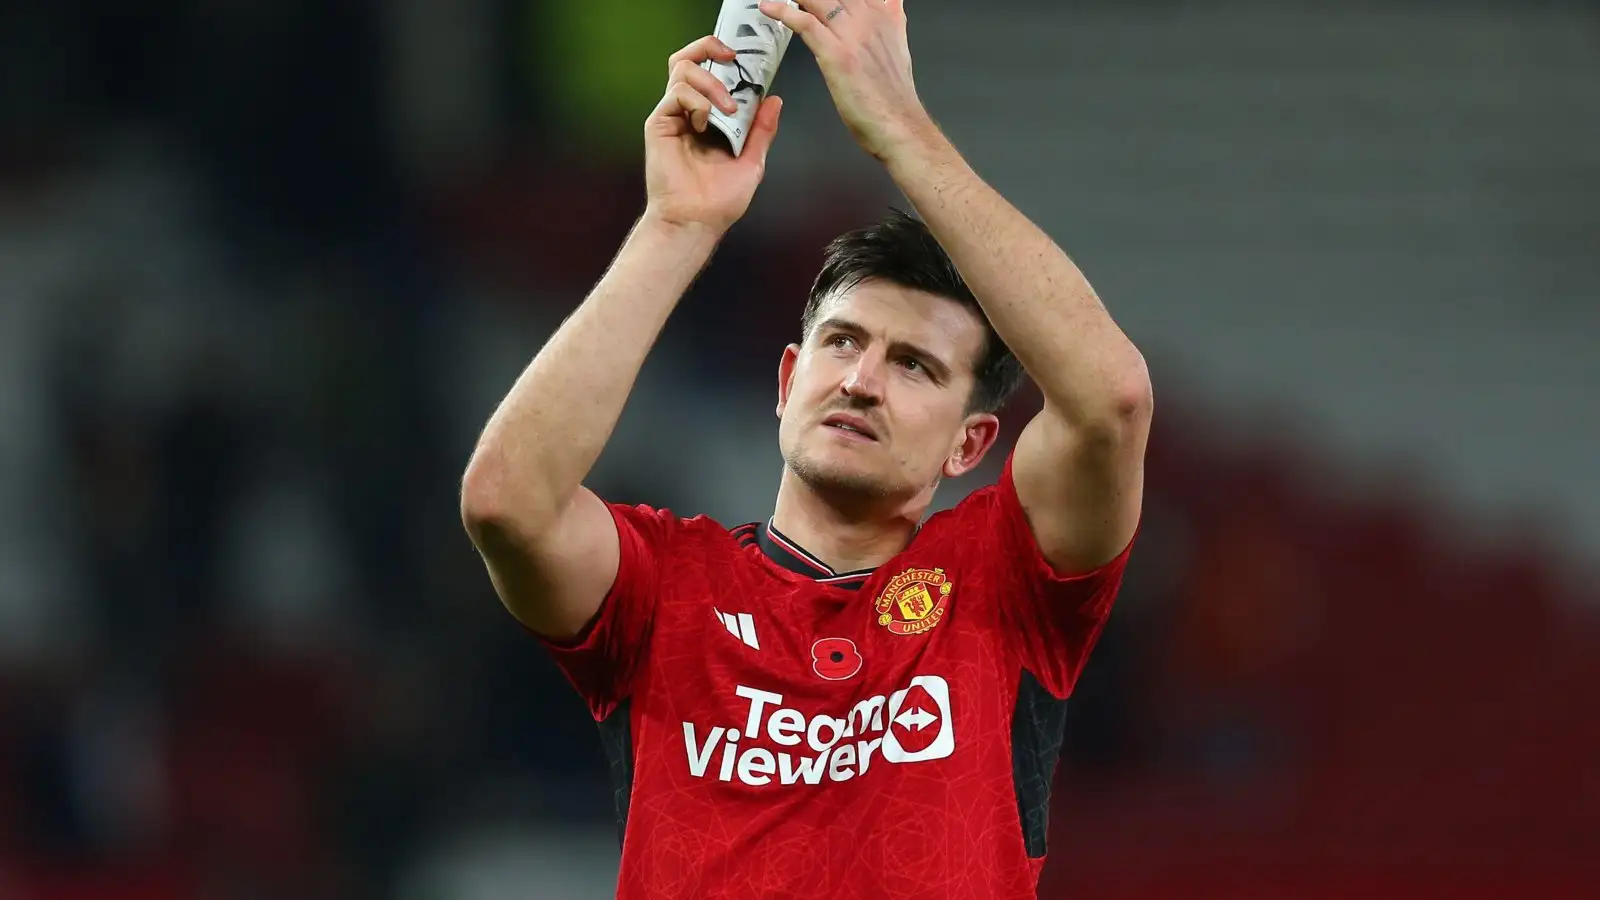 Individual Utd protector Harry Maguire